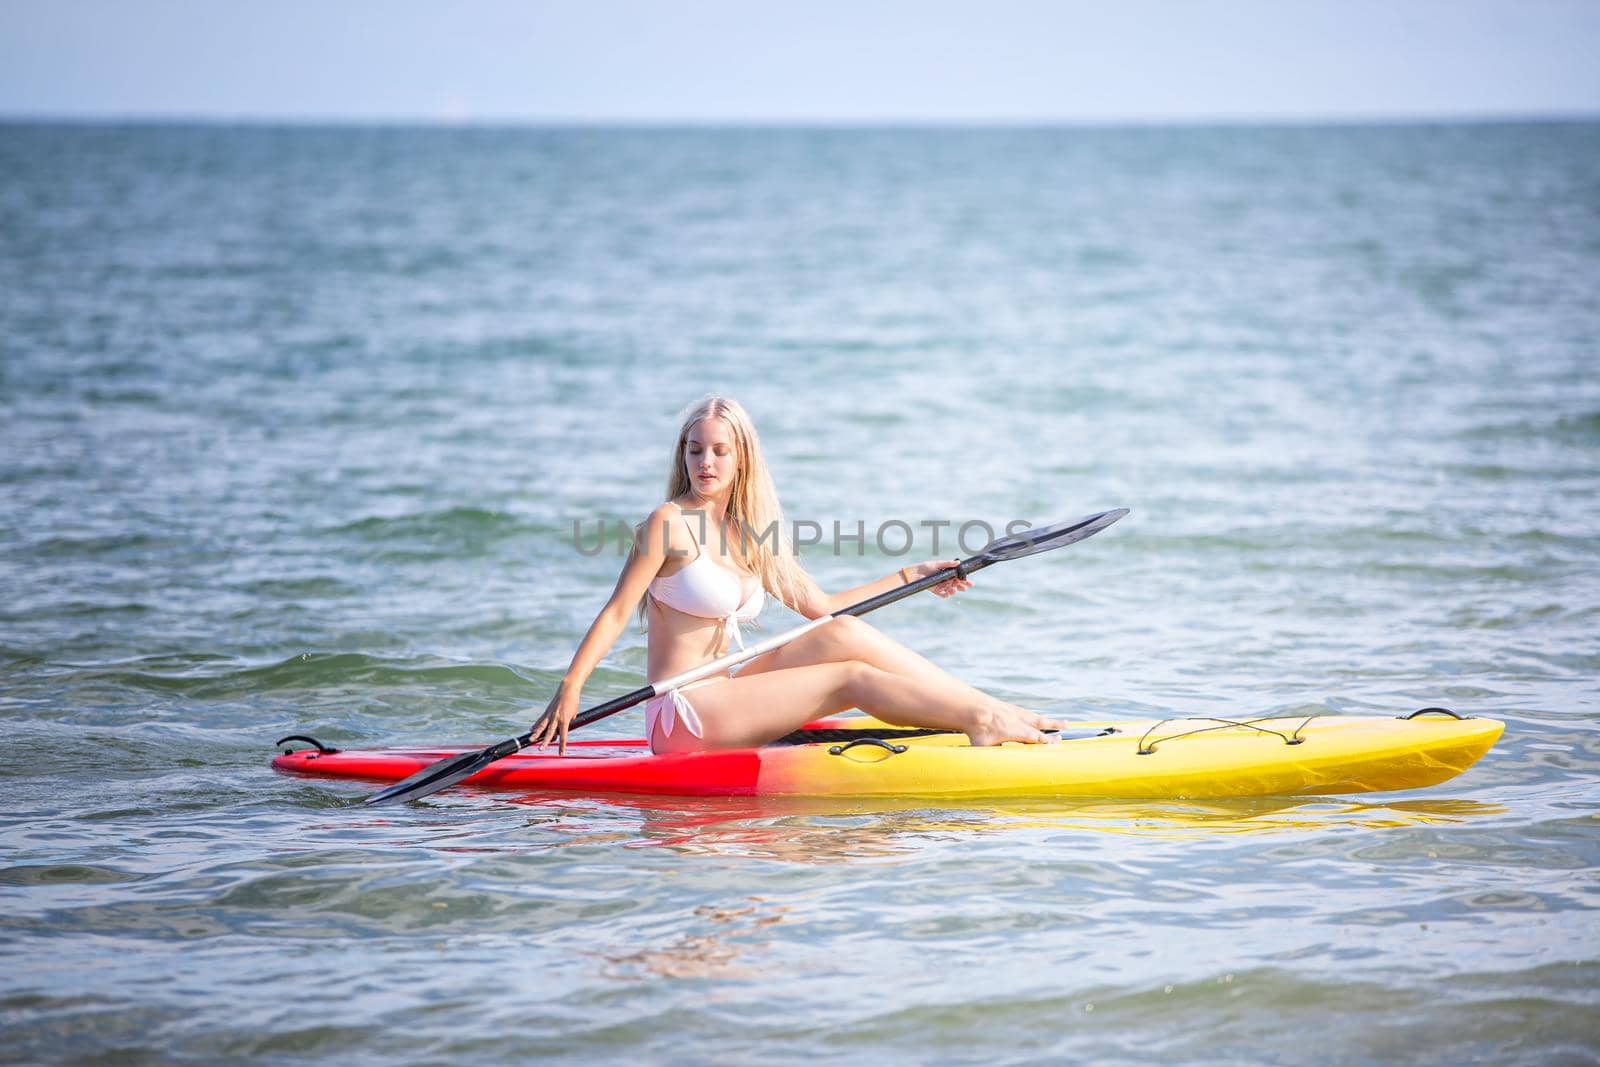 Woman on stand up paddle board. Having fun during warm summer beach vacation holiday, active woman by chuanchai